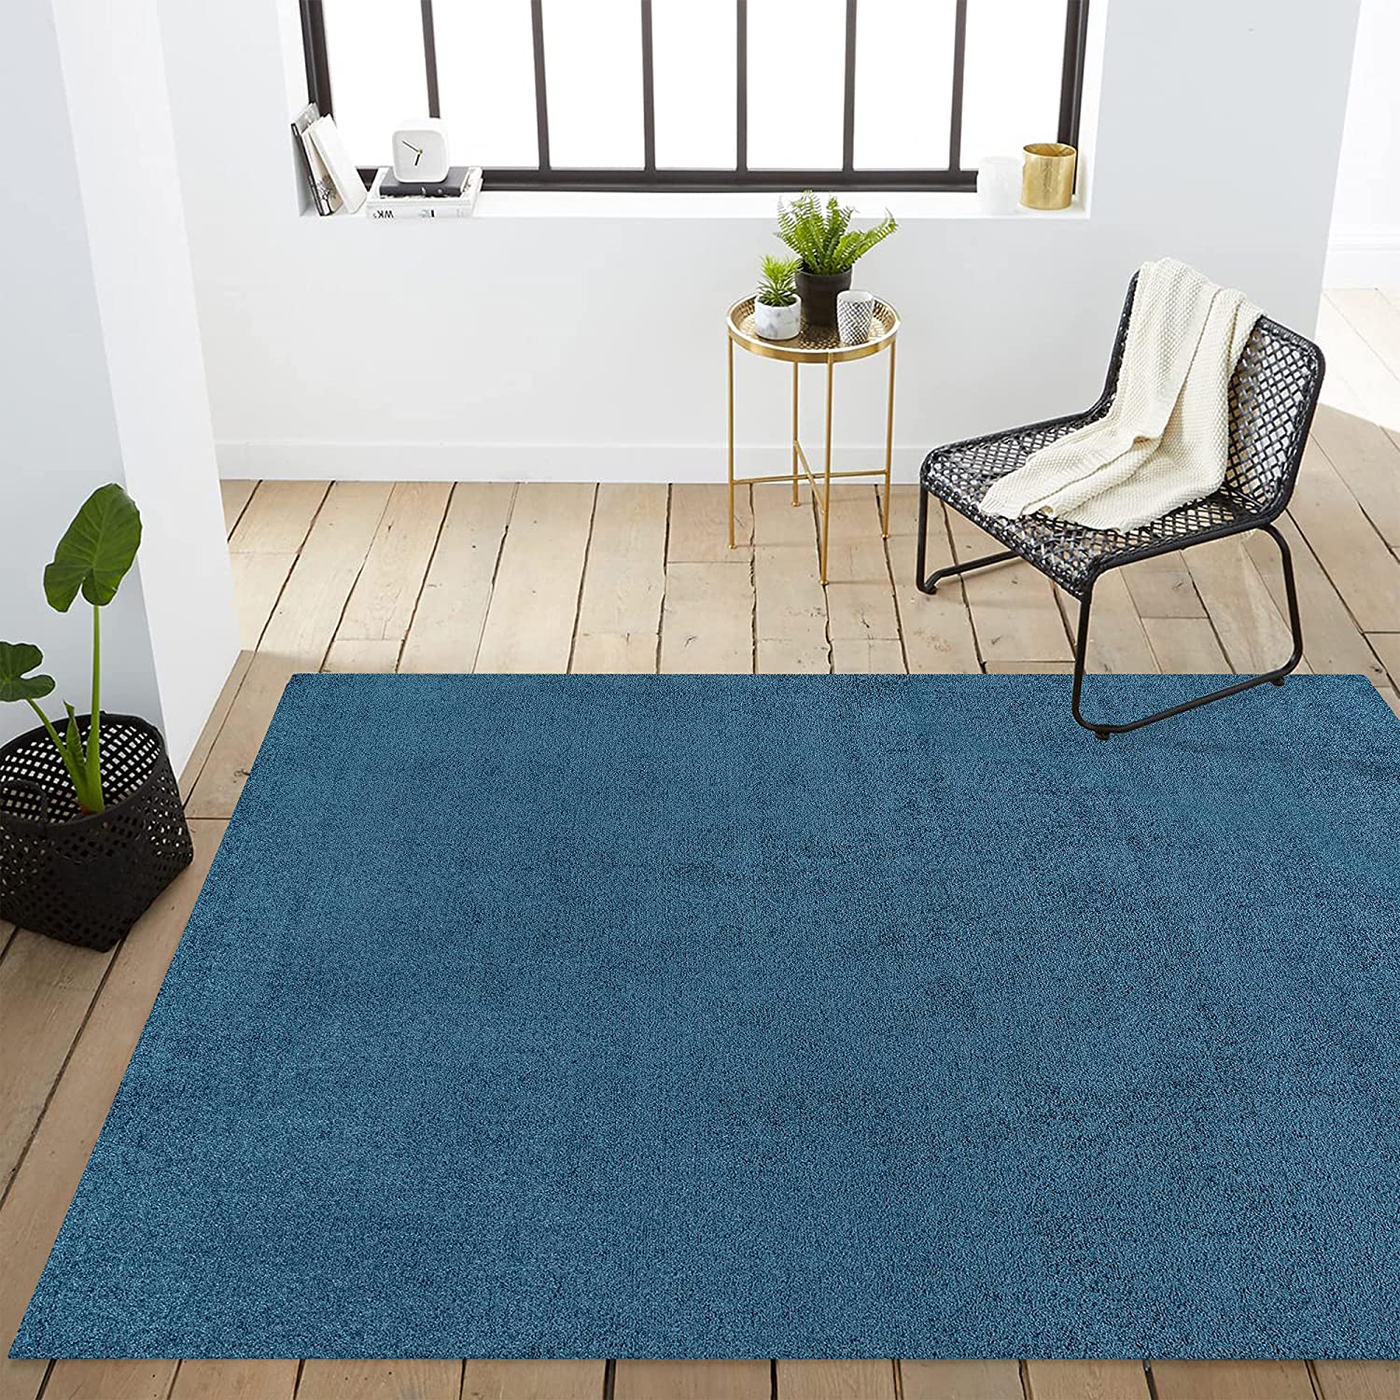 JONATHAN Y Haze Solid Low-Pile Turquoise 5 ft. x 8 ft. Area Rug, Casual,Contemporary,Solid,Traditional,EasyCleaning,Bedroom,LivingRoom, Non Shedding